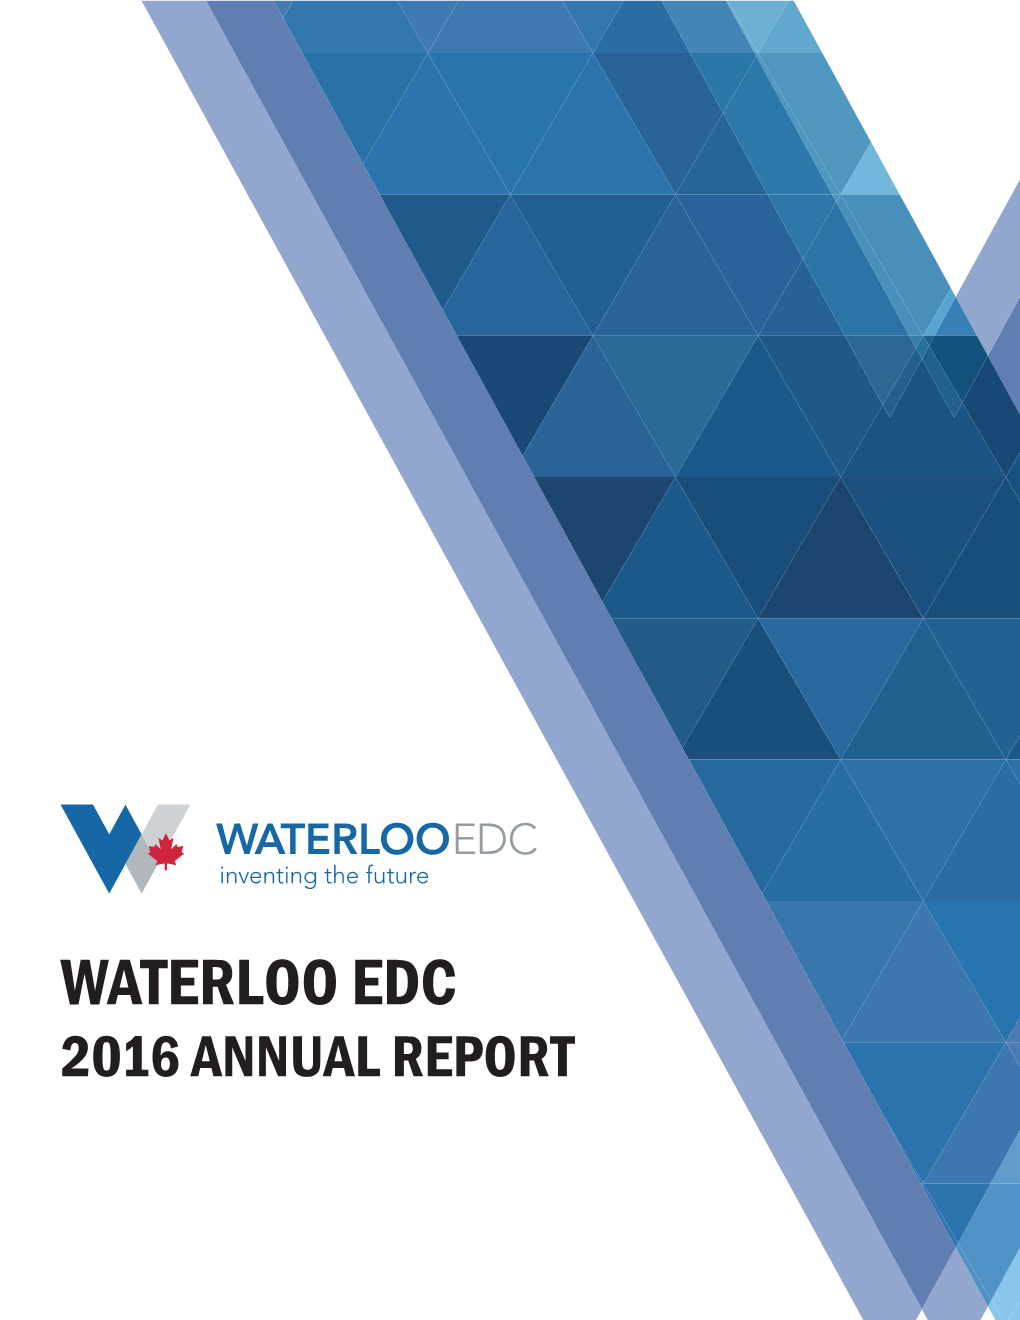 Waterloo Edc 2016 Annual Report Message from the Board of Directors